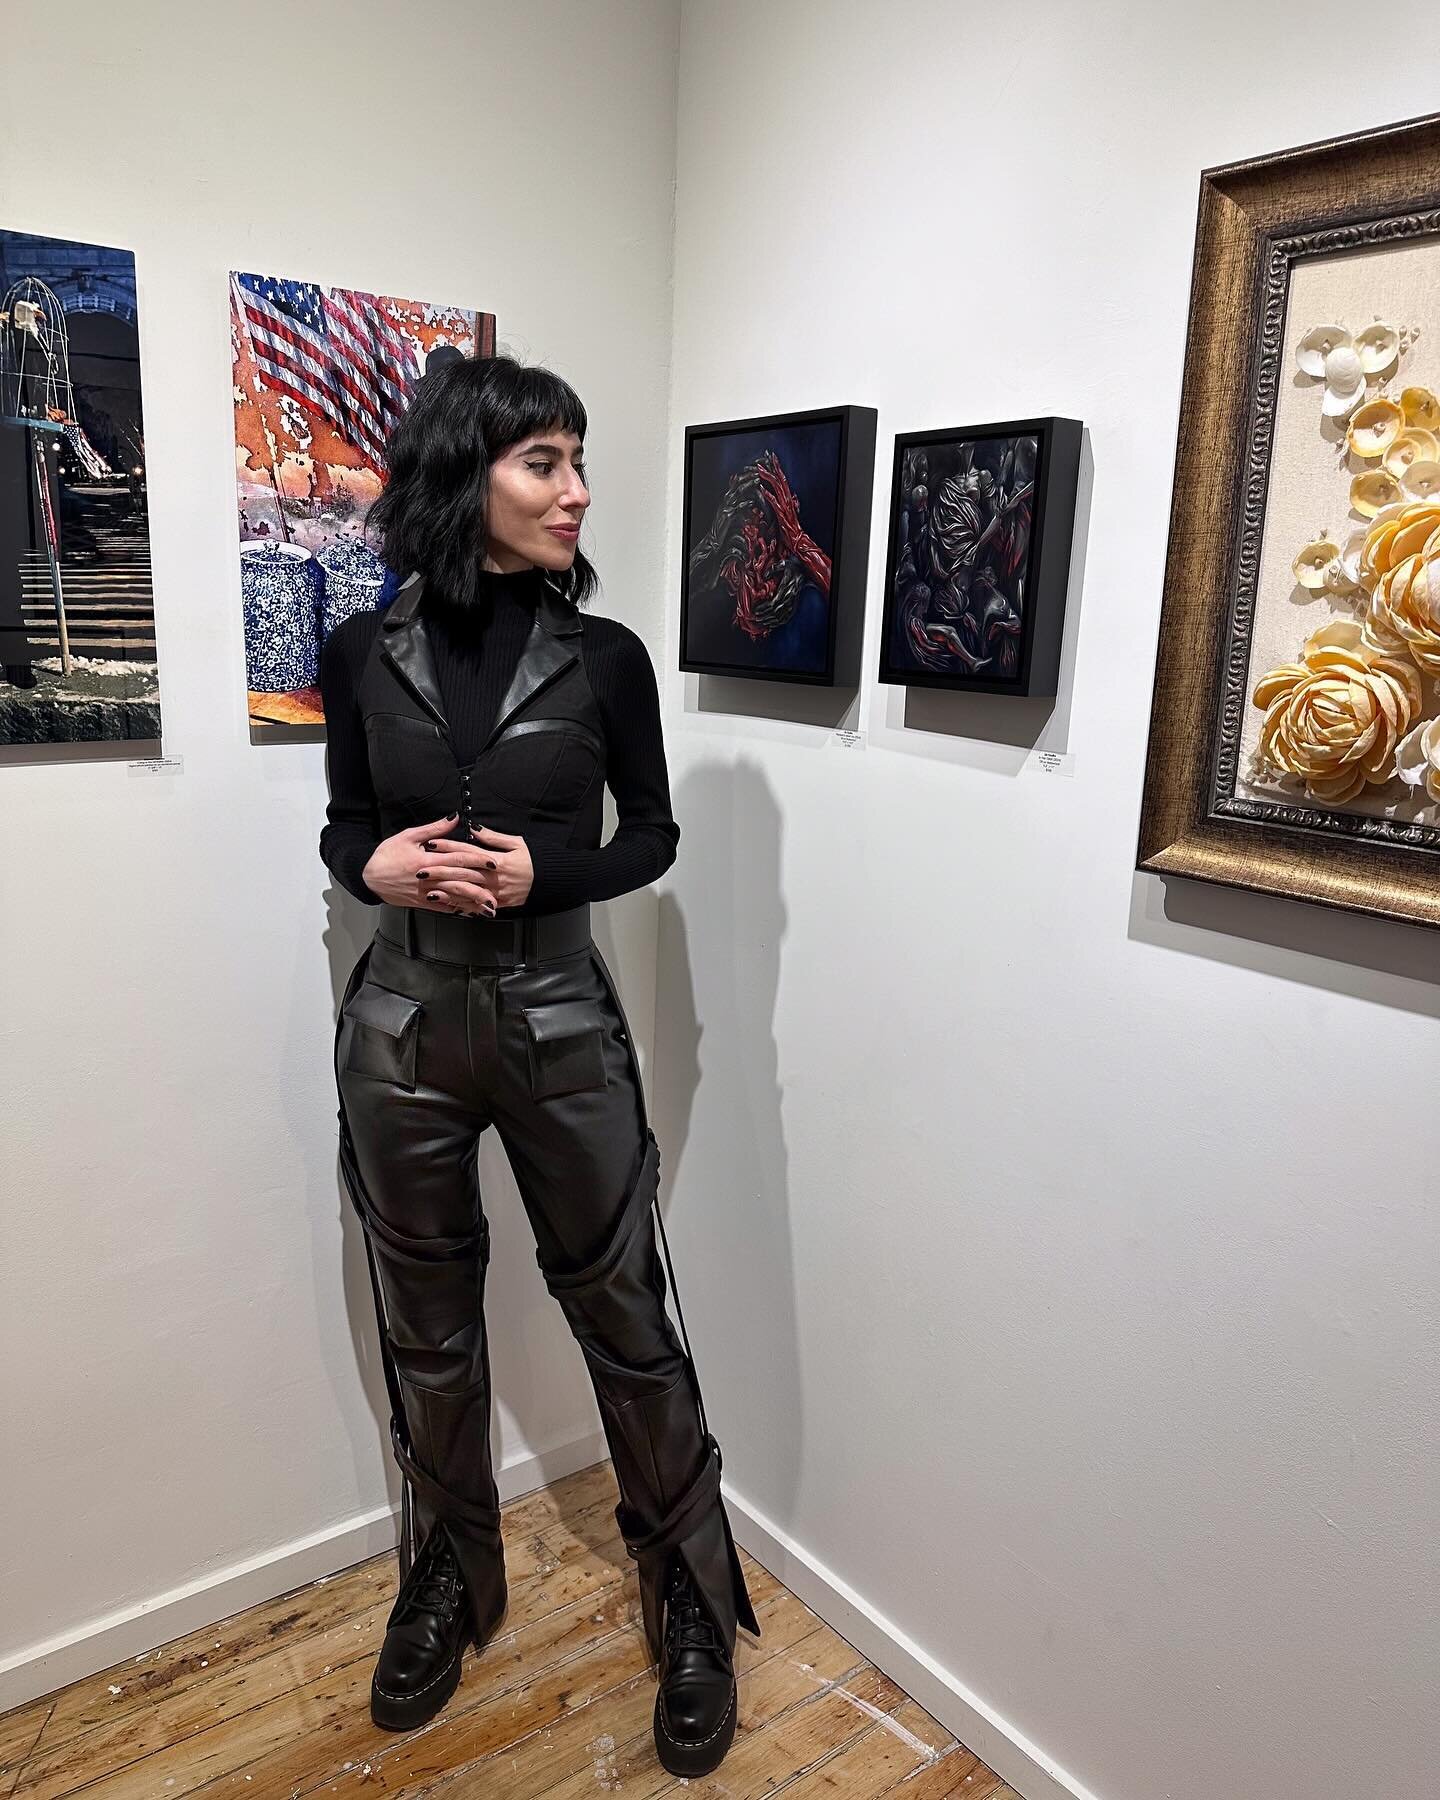 Honored to have two of my new paintings, &ldquo;Pleased to Meet You&rdquo; and &ldquo;In Her Orbit&rdquo; at @atlanticgallerynyc in Chelsea!

The show runs until March 23 🖤 Stop by if you find yourself in this gallery-central area of Manhattan. Tons